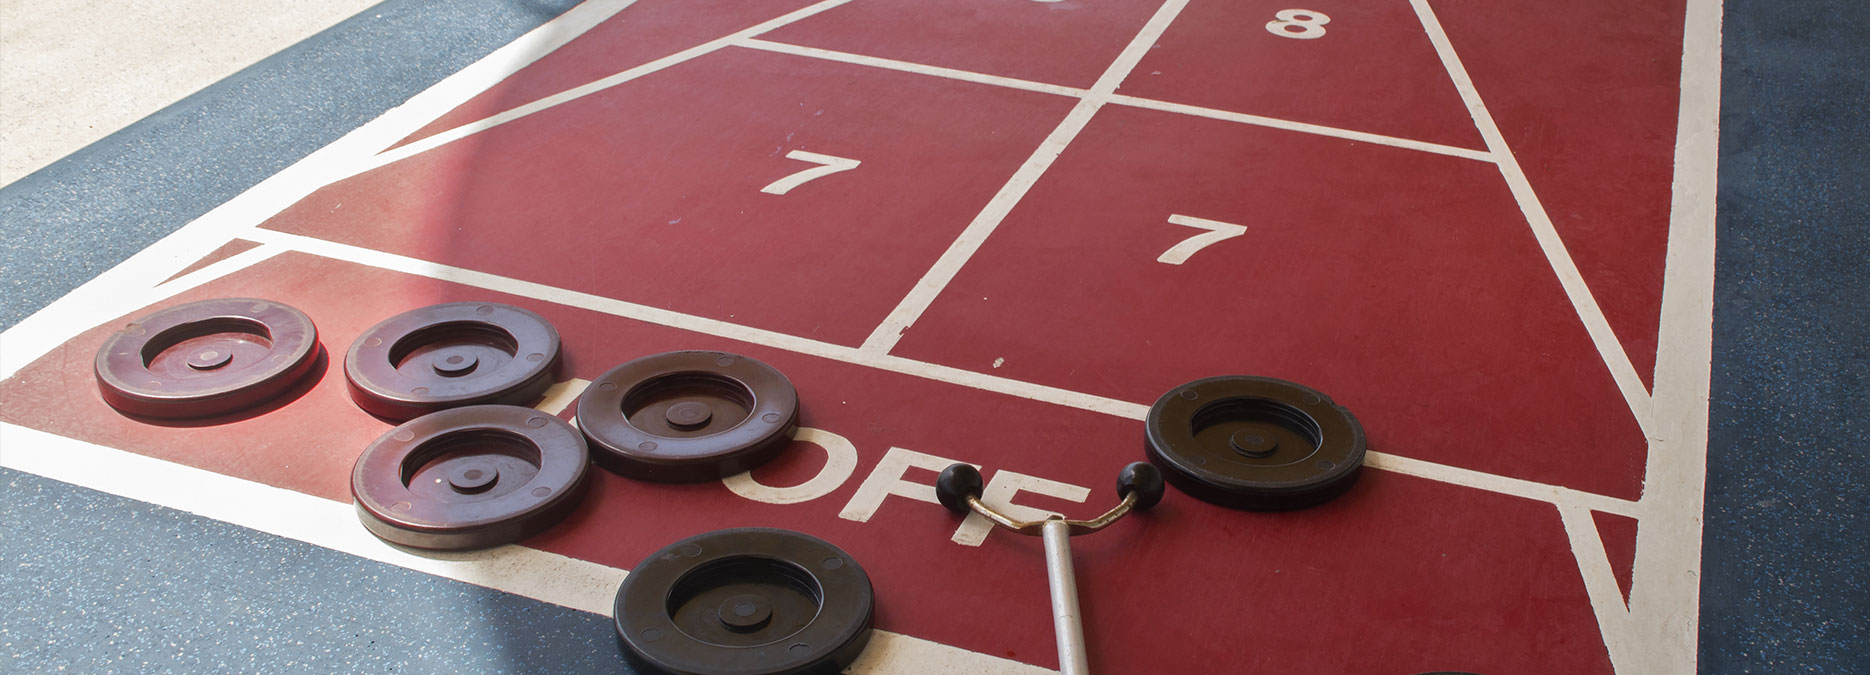 5 THINGS TO KNOW ABOUT SHUFFLEBOARD - Backyard Sports